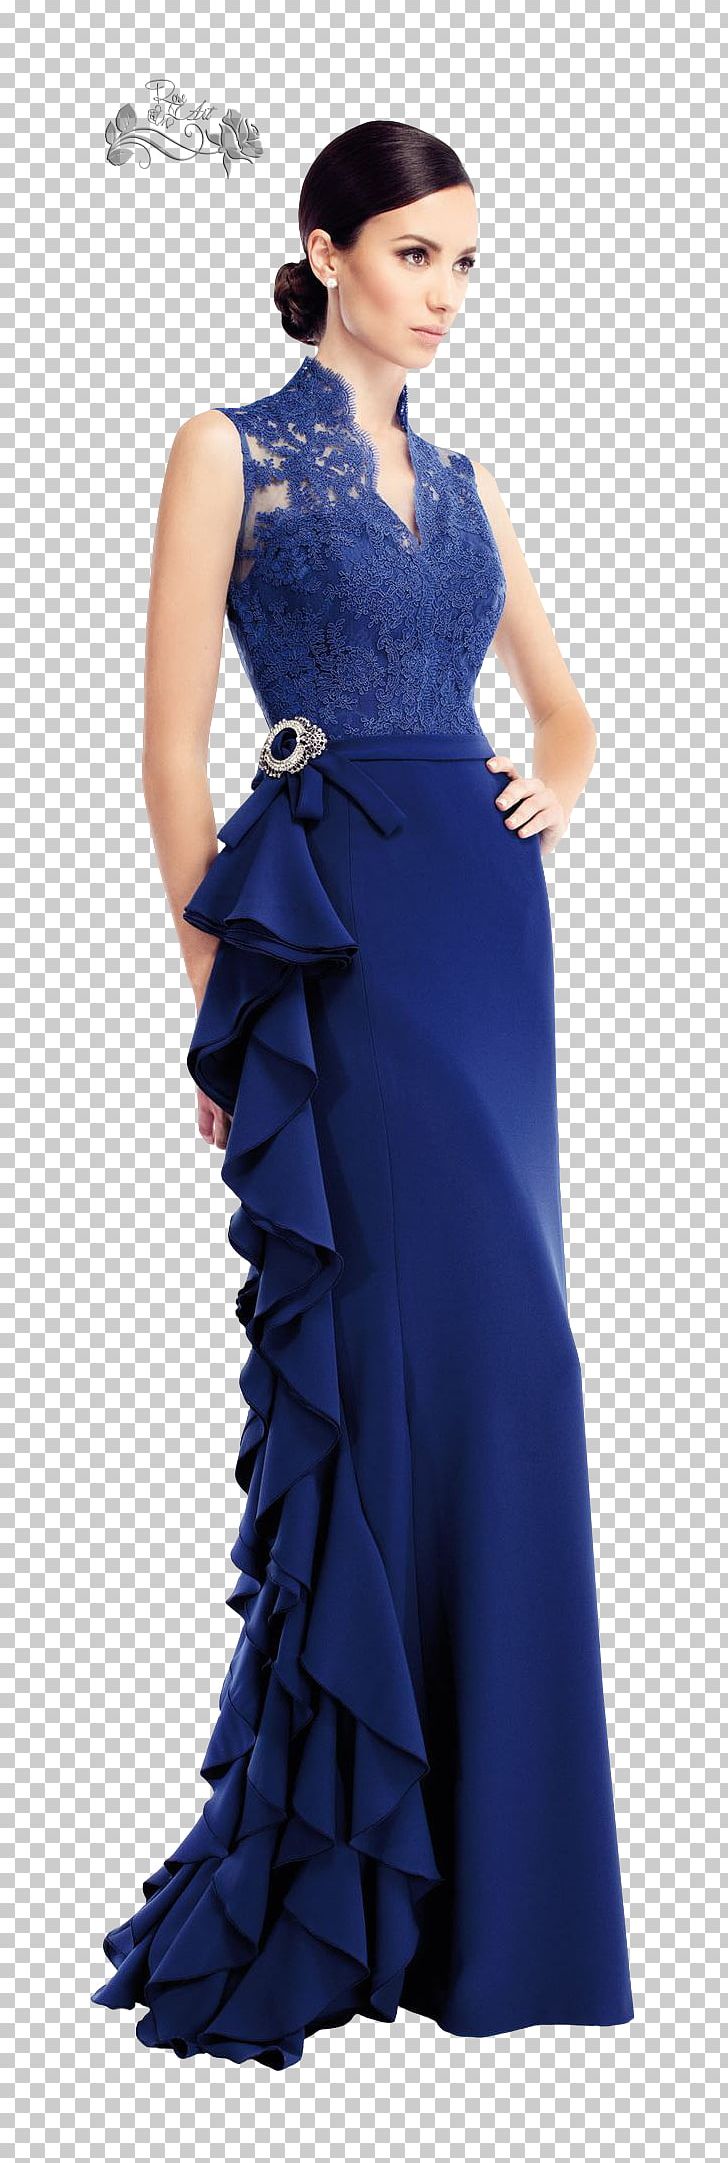 Cocktail Dress Evening Gown Clothing PNG, Clipart, Blue, Bridal Party Dress, Casual, Clo, Cobalt Blue Free PNG Download